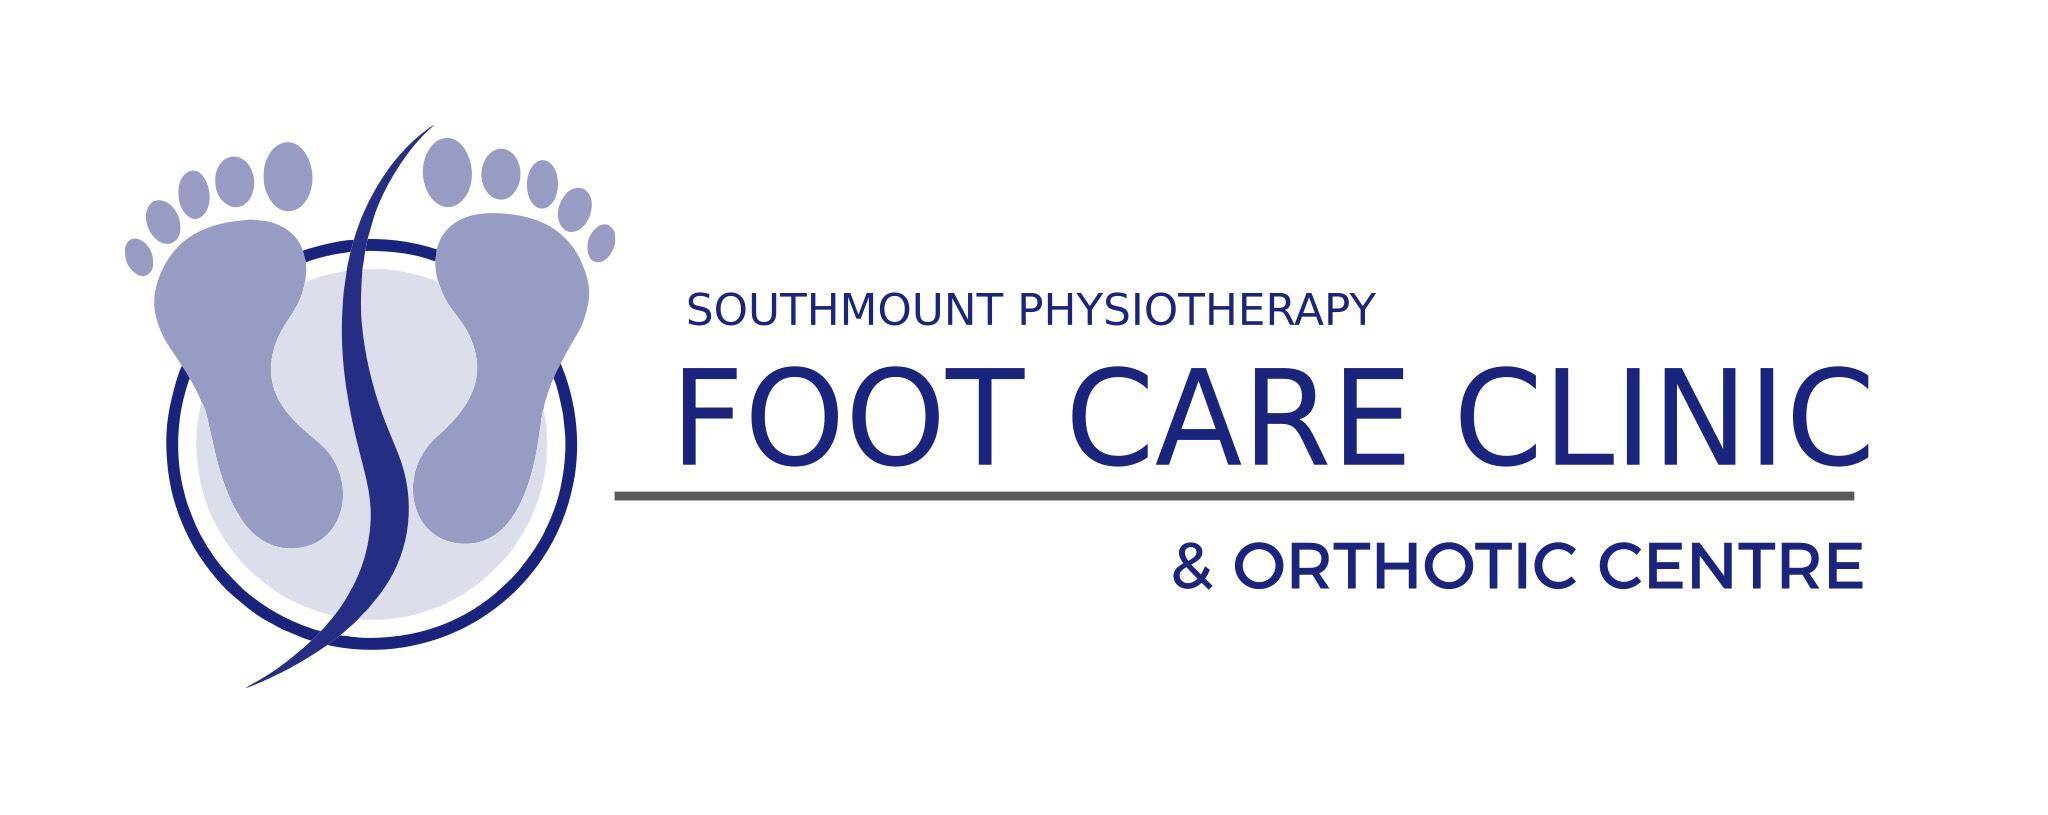 Southmount Physiotherapy Foot Care Clinic & Orthotic Centre